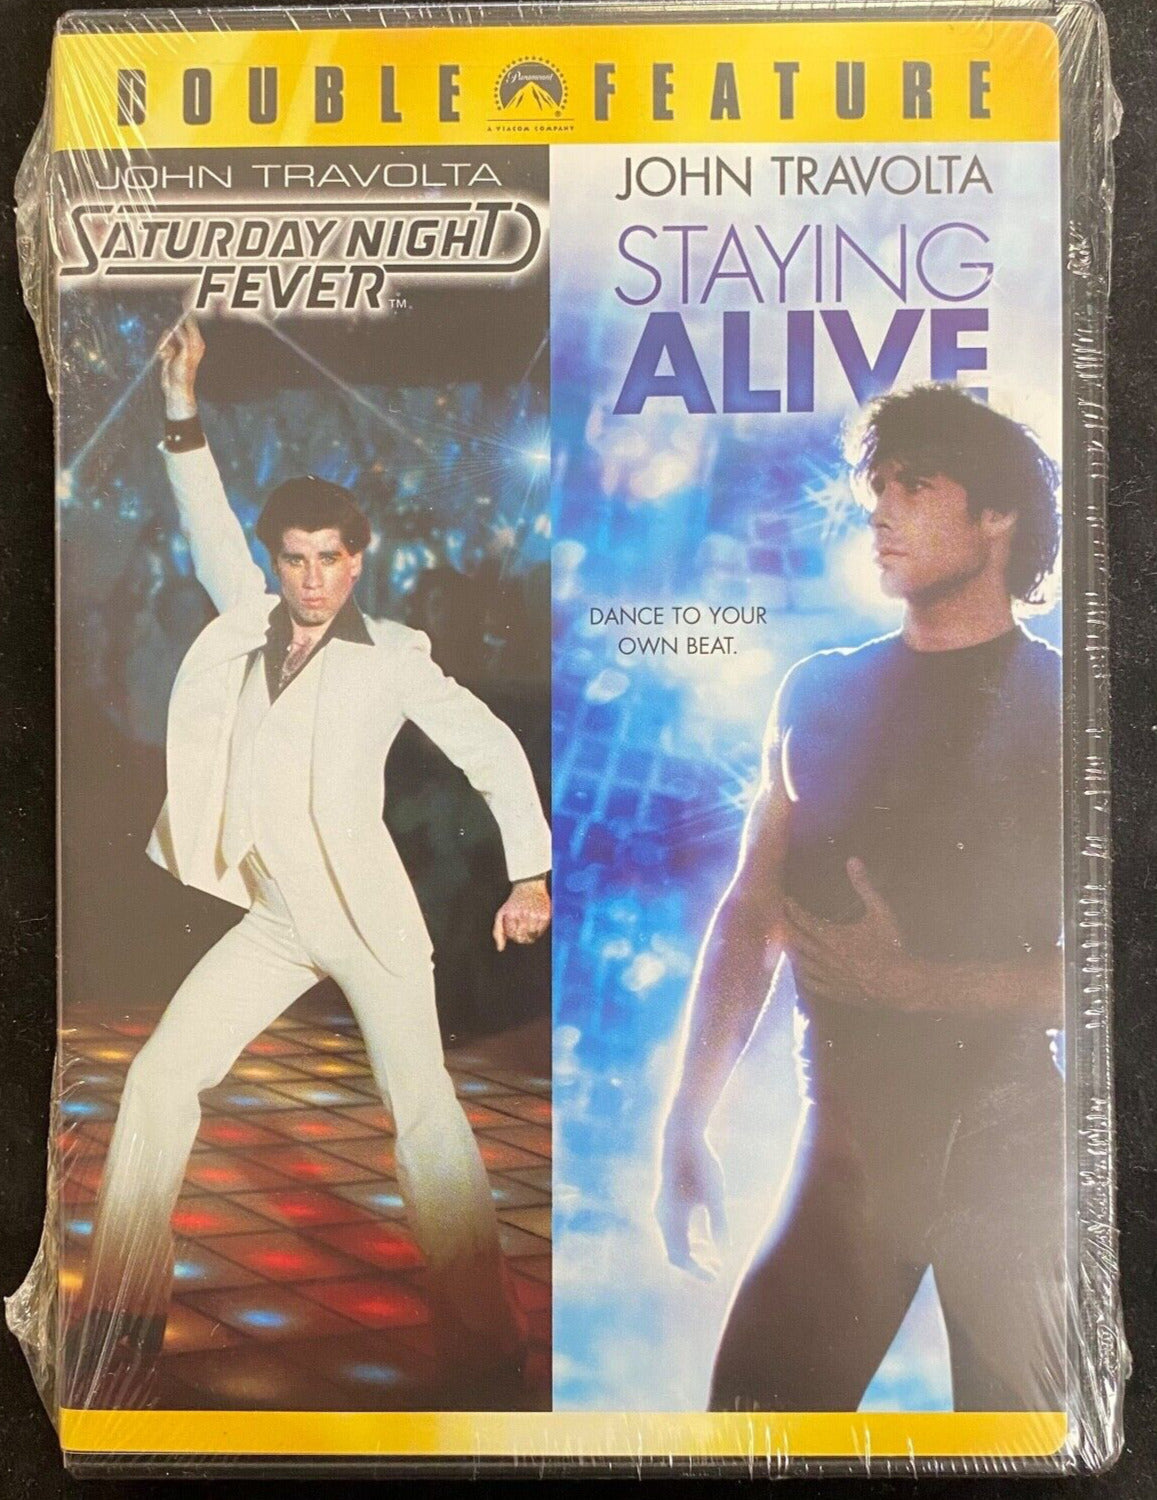 Saturday Night Fever / Staying Alive (DVD, 2007) * NEW